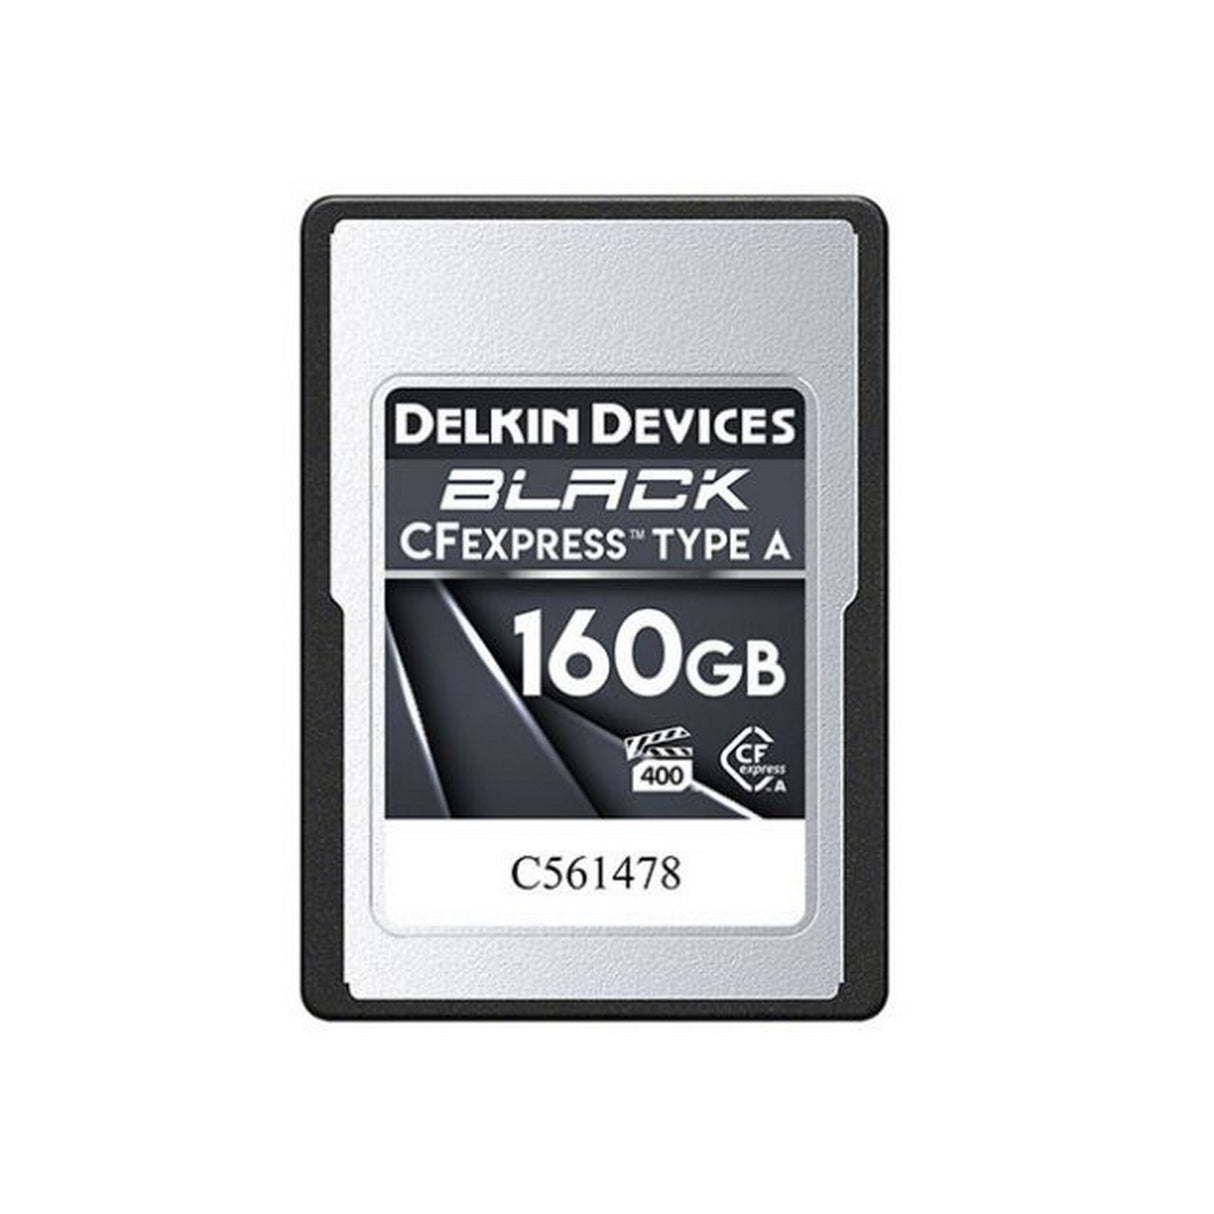 Delkin Devices BLACK CFexpress Type A Memory Card, 160GB